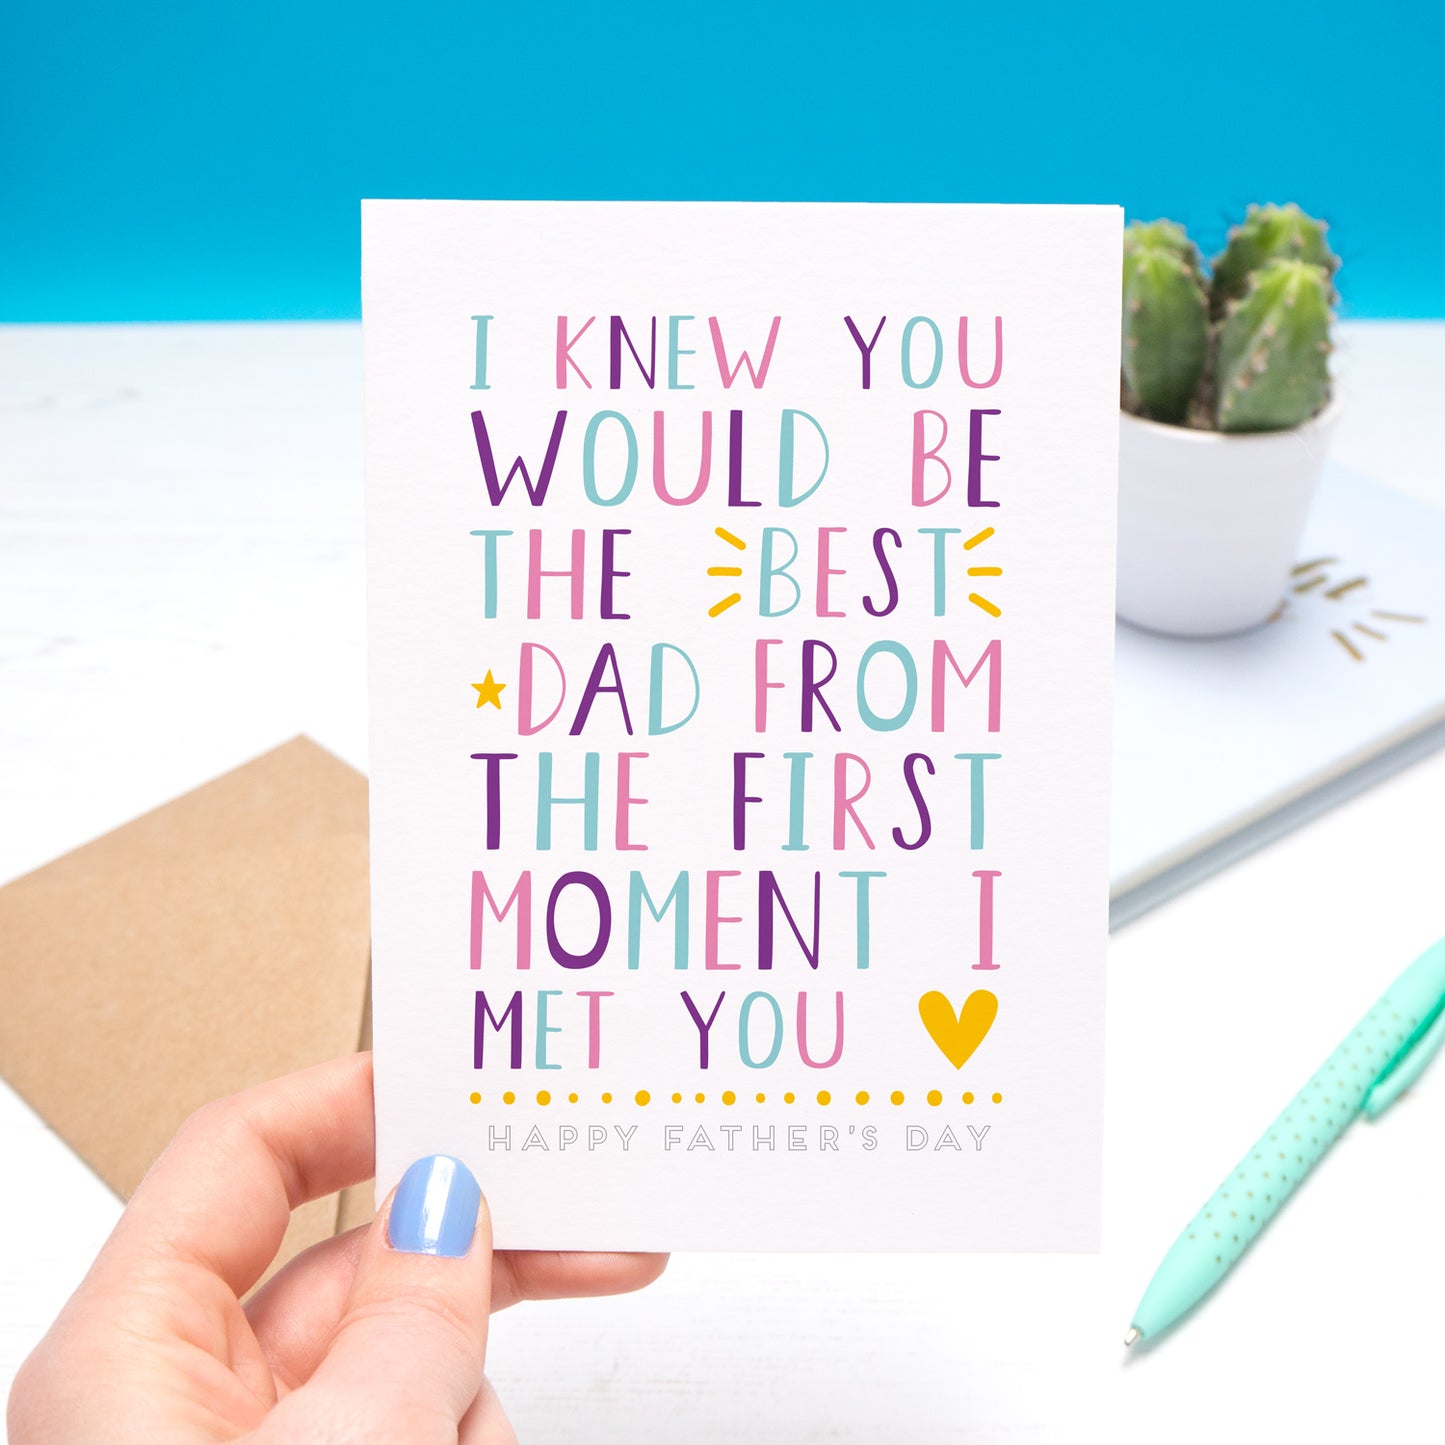 I knew you would be the best dad from the first moment I met you - Father's day in pink, purple and blue with 'happy fathers day' written underneath